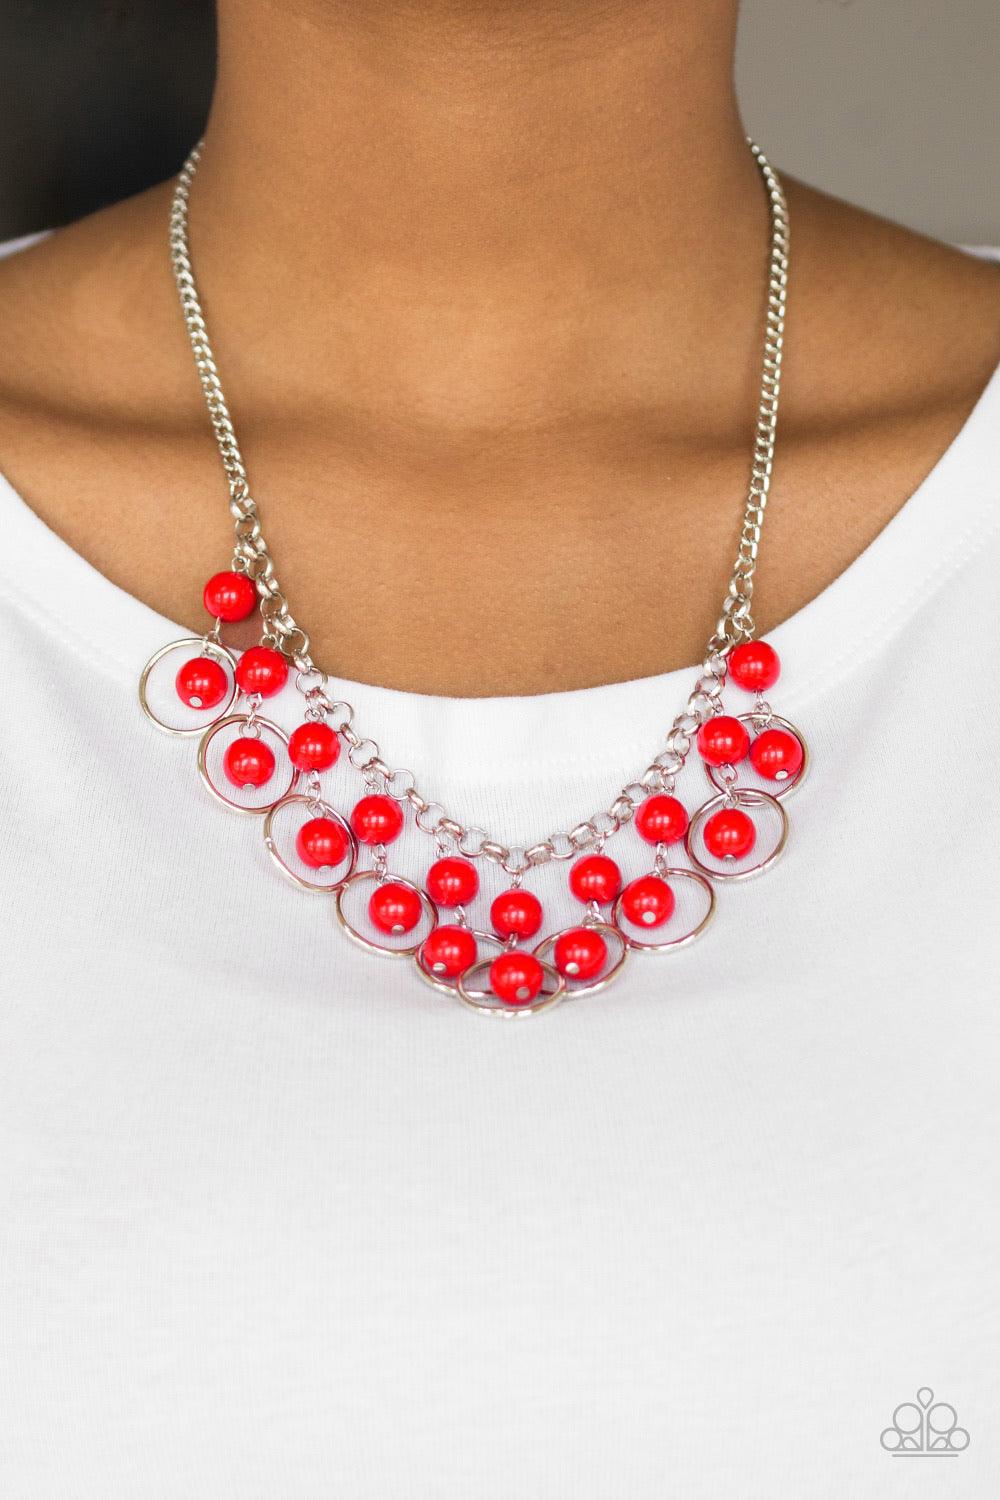 Paparazzi Accessories Really Rococo - Red Polished red beads and shimmery silver hoops drip from the bottom of a glistening silver chain, creating a playful fringe below the collar. Features an adjustable clasp closure. Jewelry